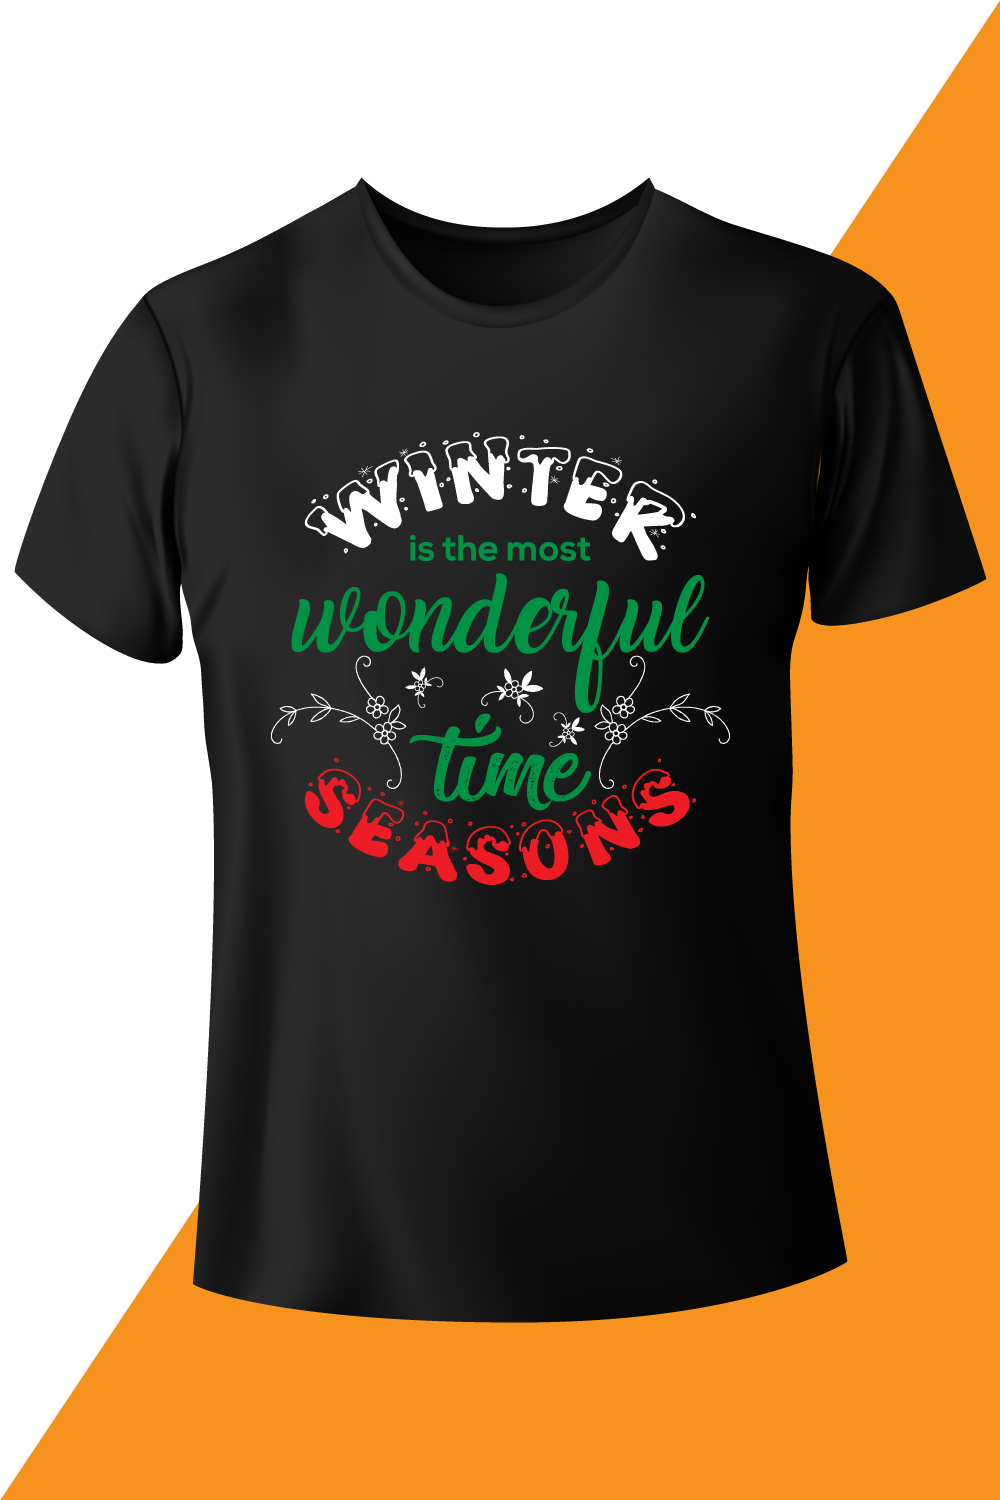 Image of a black t-shirt with irresistible slogan winter is the most wonderful time season.